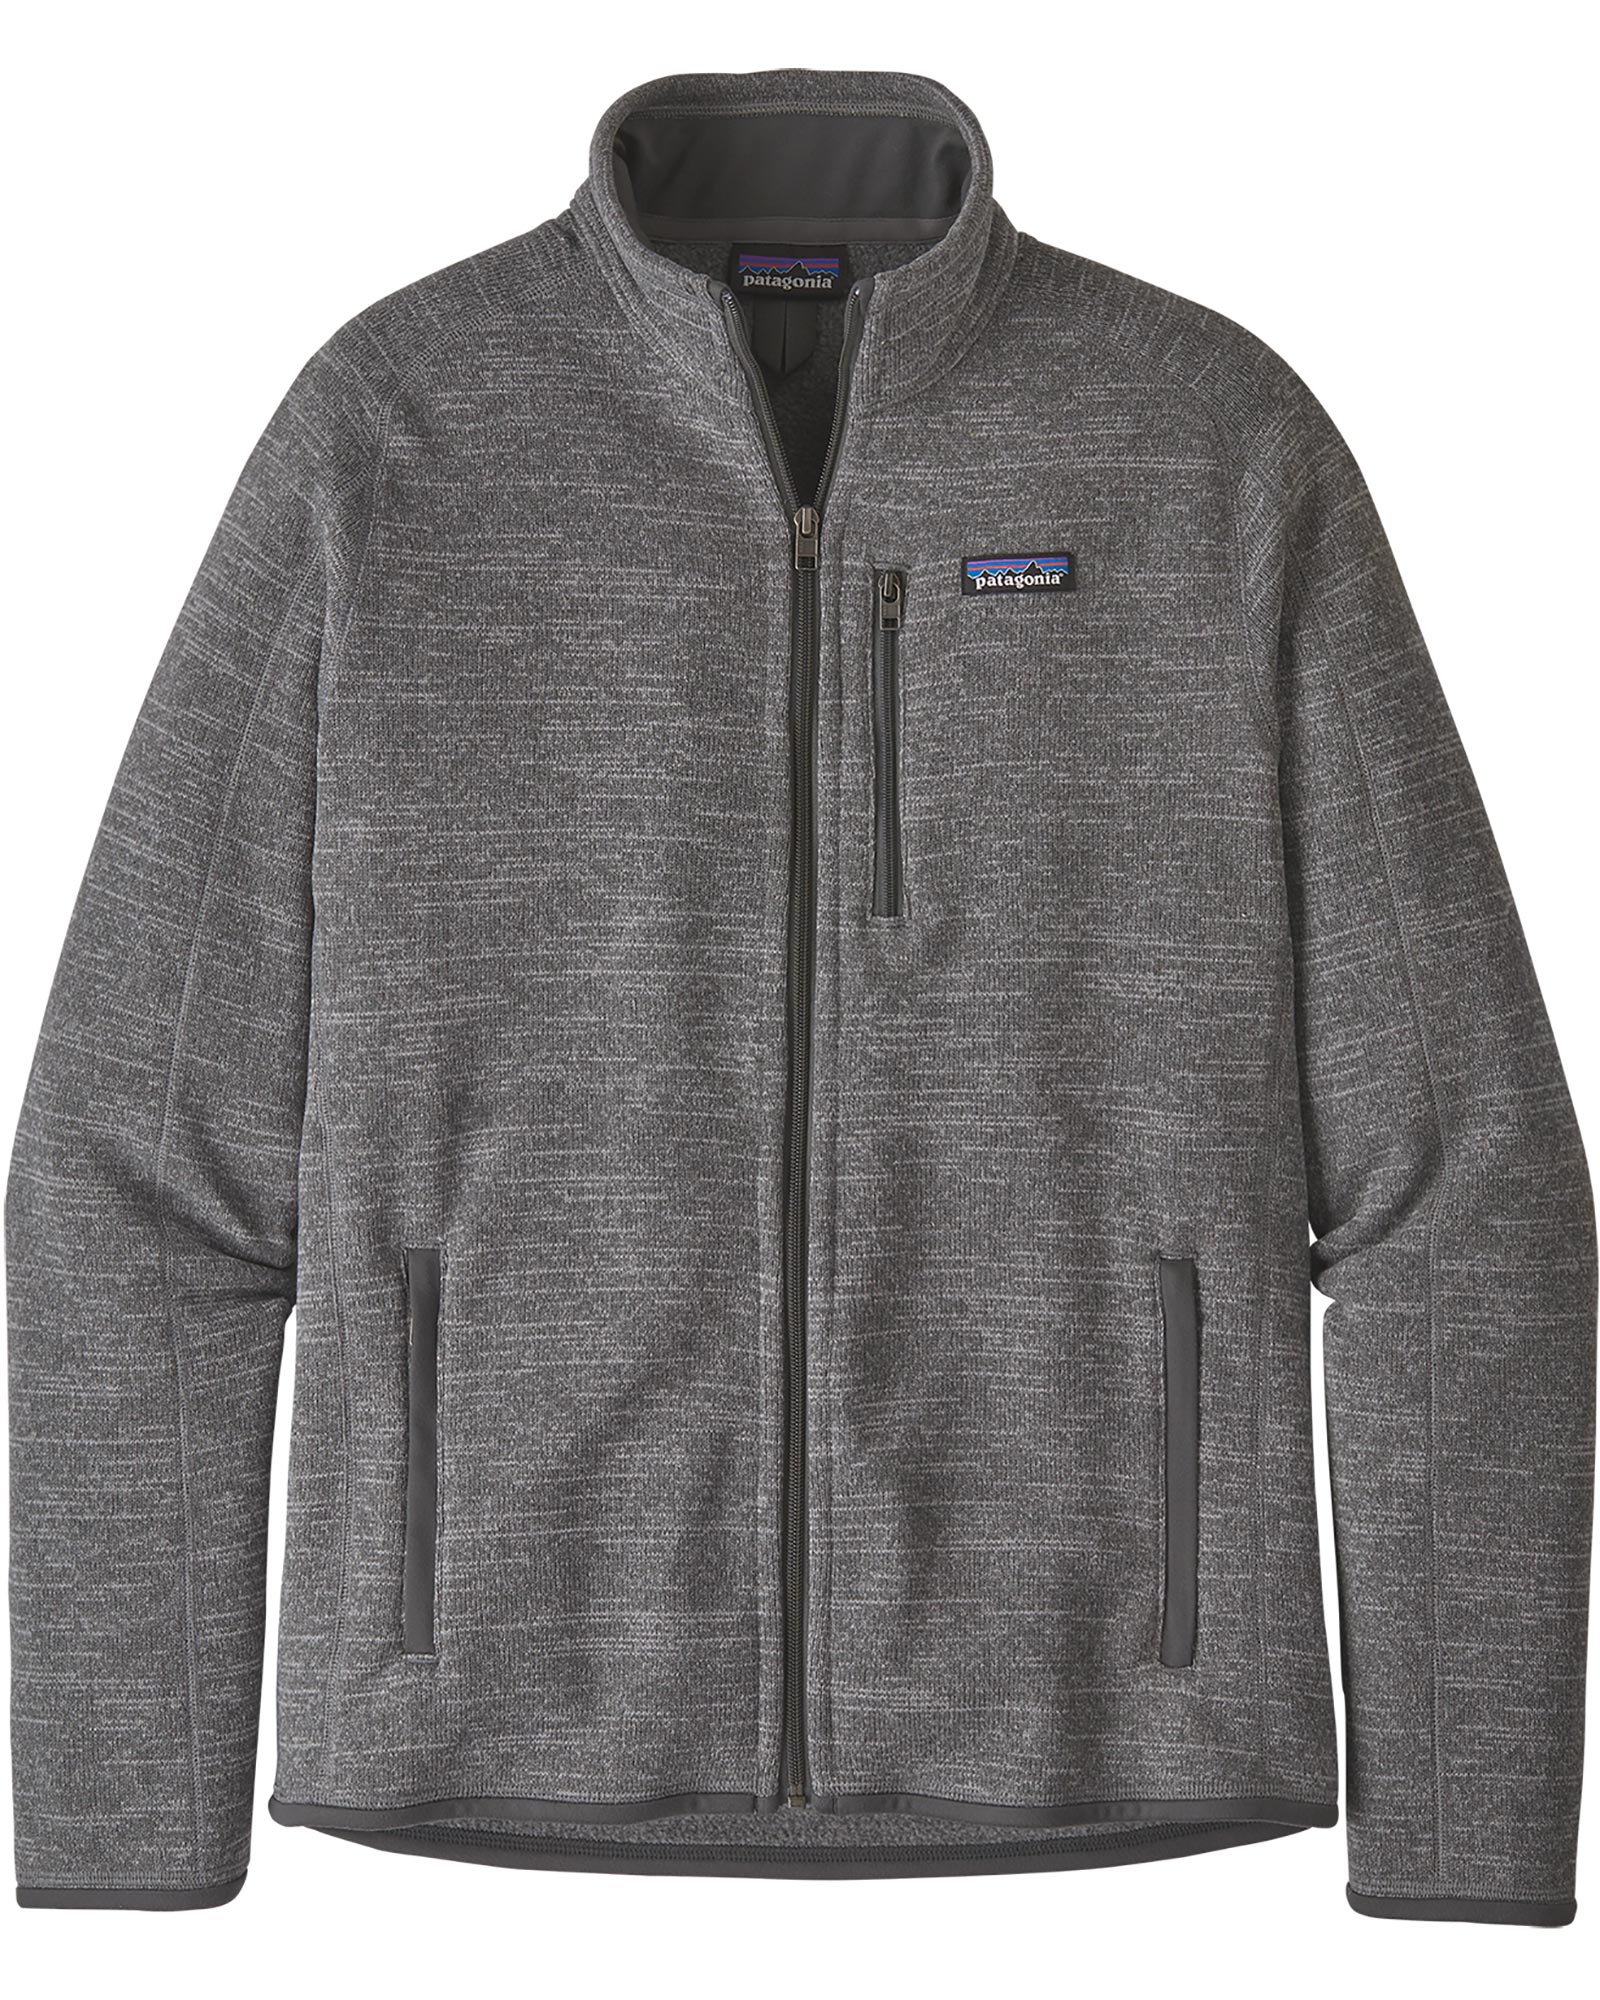 Patagonia Better Sweater Men’s Jacket - Nickle S